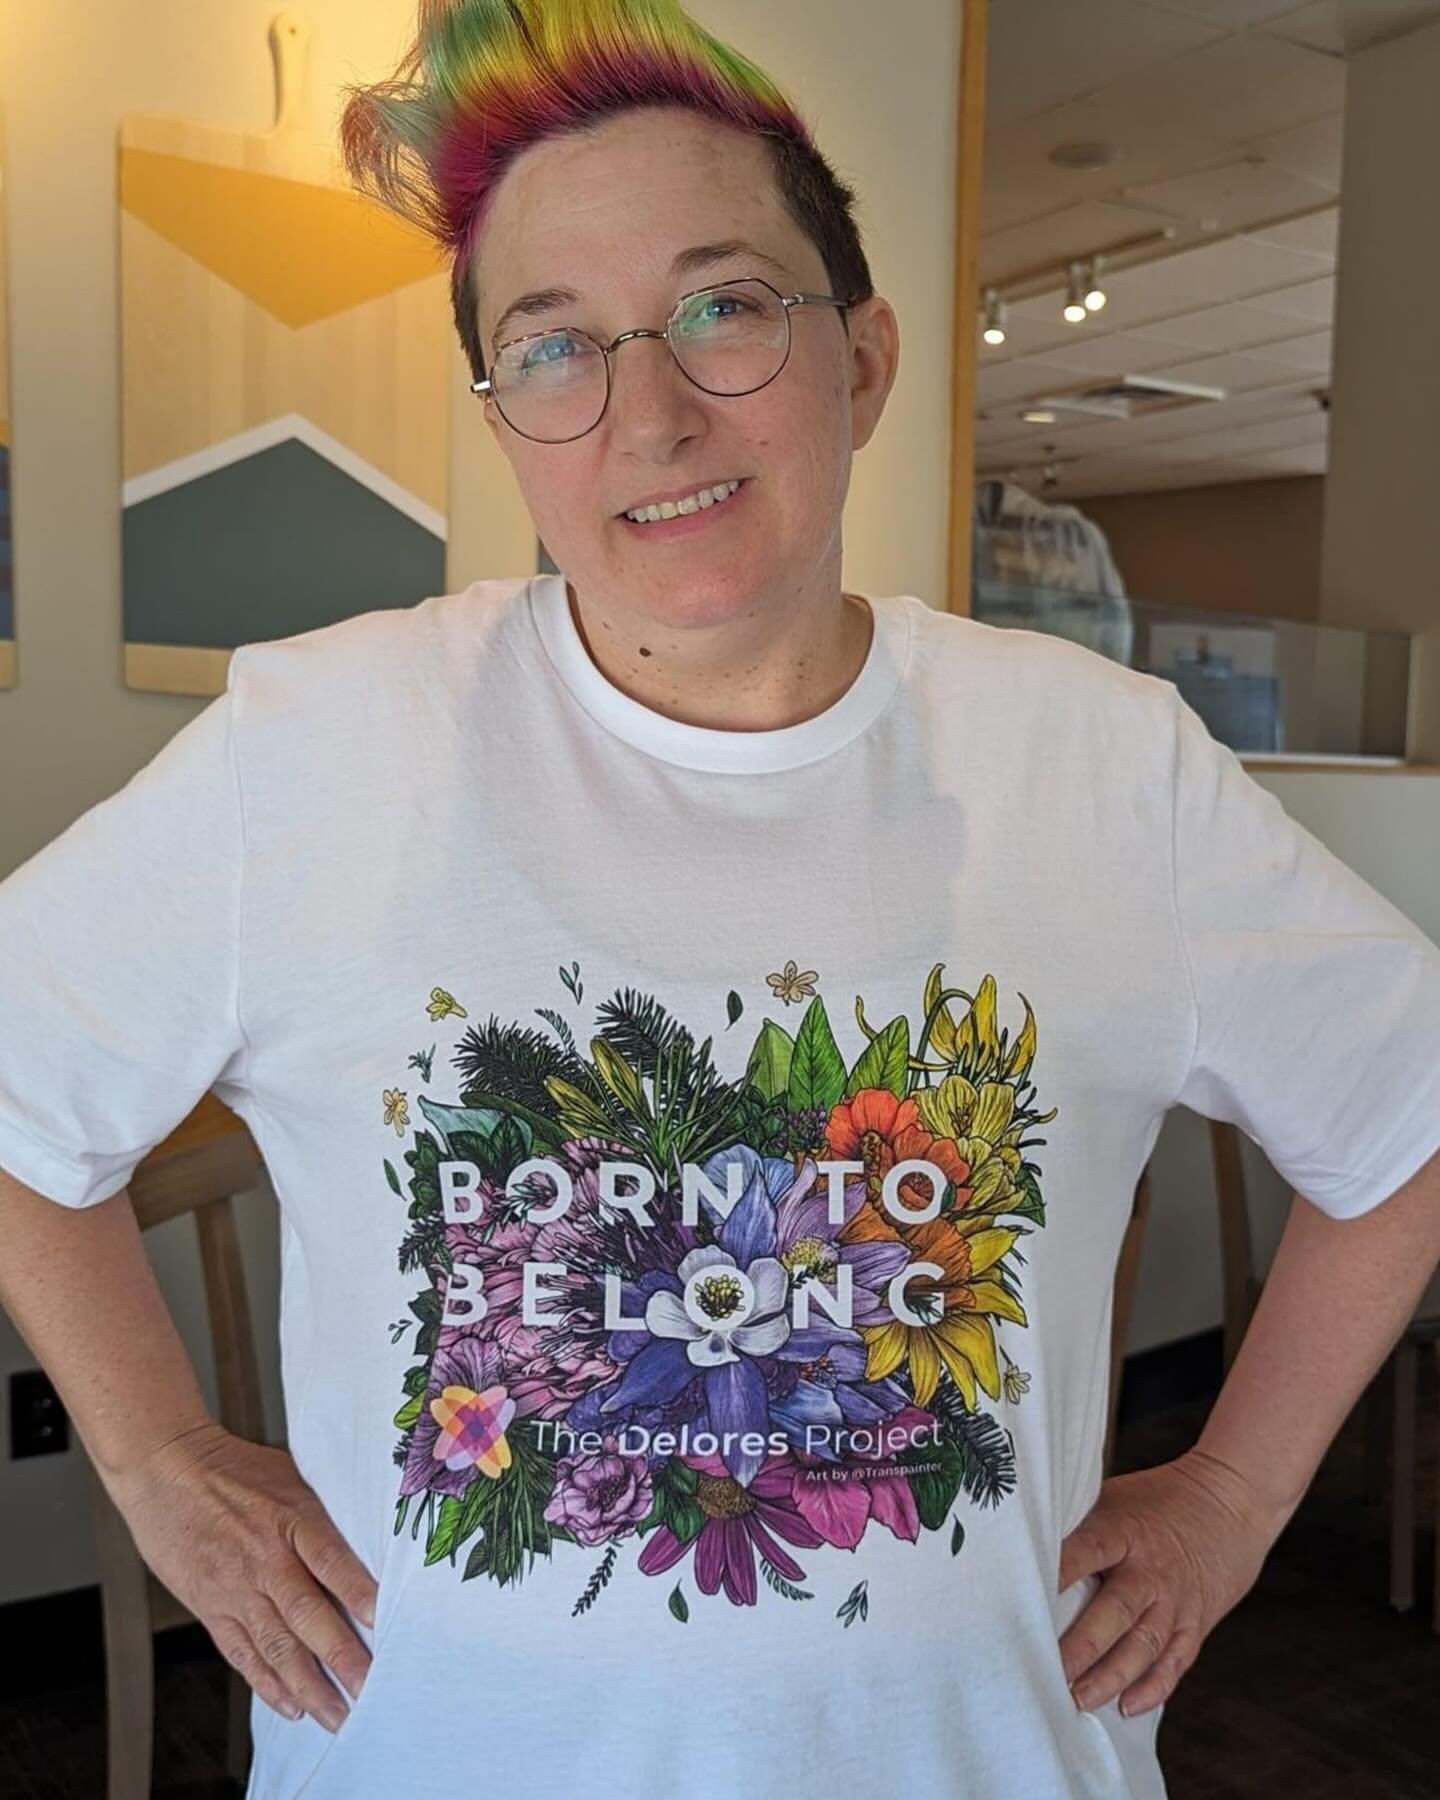 Born to Belong has made it to Texas! Share your photos with this beautiful design and tag us and use the hashtags #BorntoBelong and #BuildingBelonging Get yours at https://thedeloresproject.org/store or at the link in our bio!